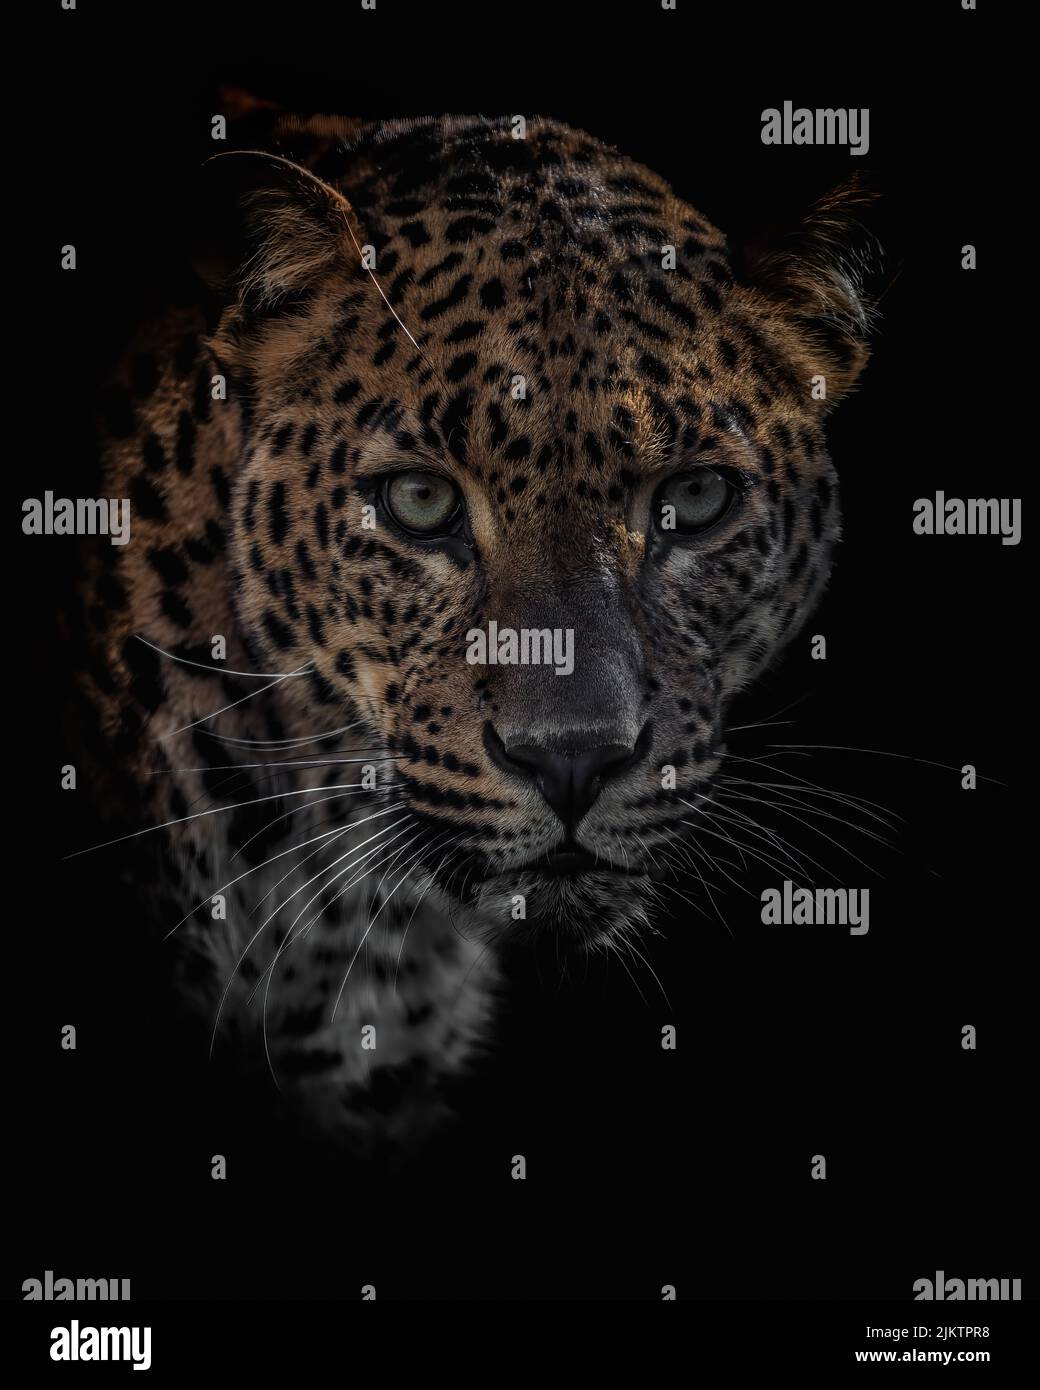 A scenic shot of a Sri Lankan leopard wildcat coming out of the darkness Stock Photo